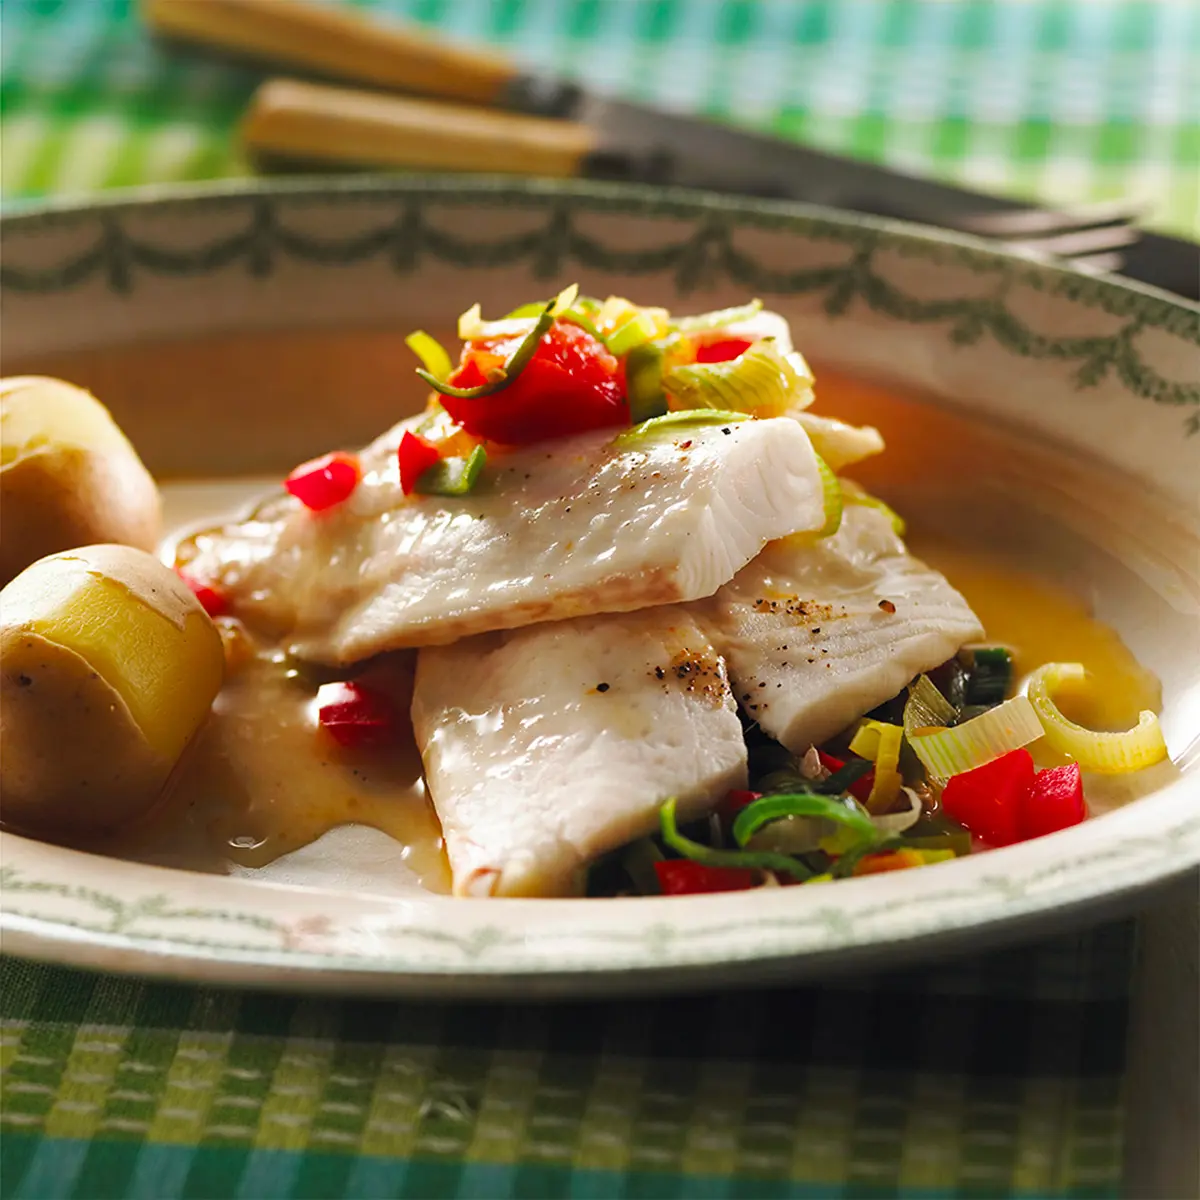 Talapia fillet with leeks